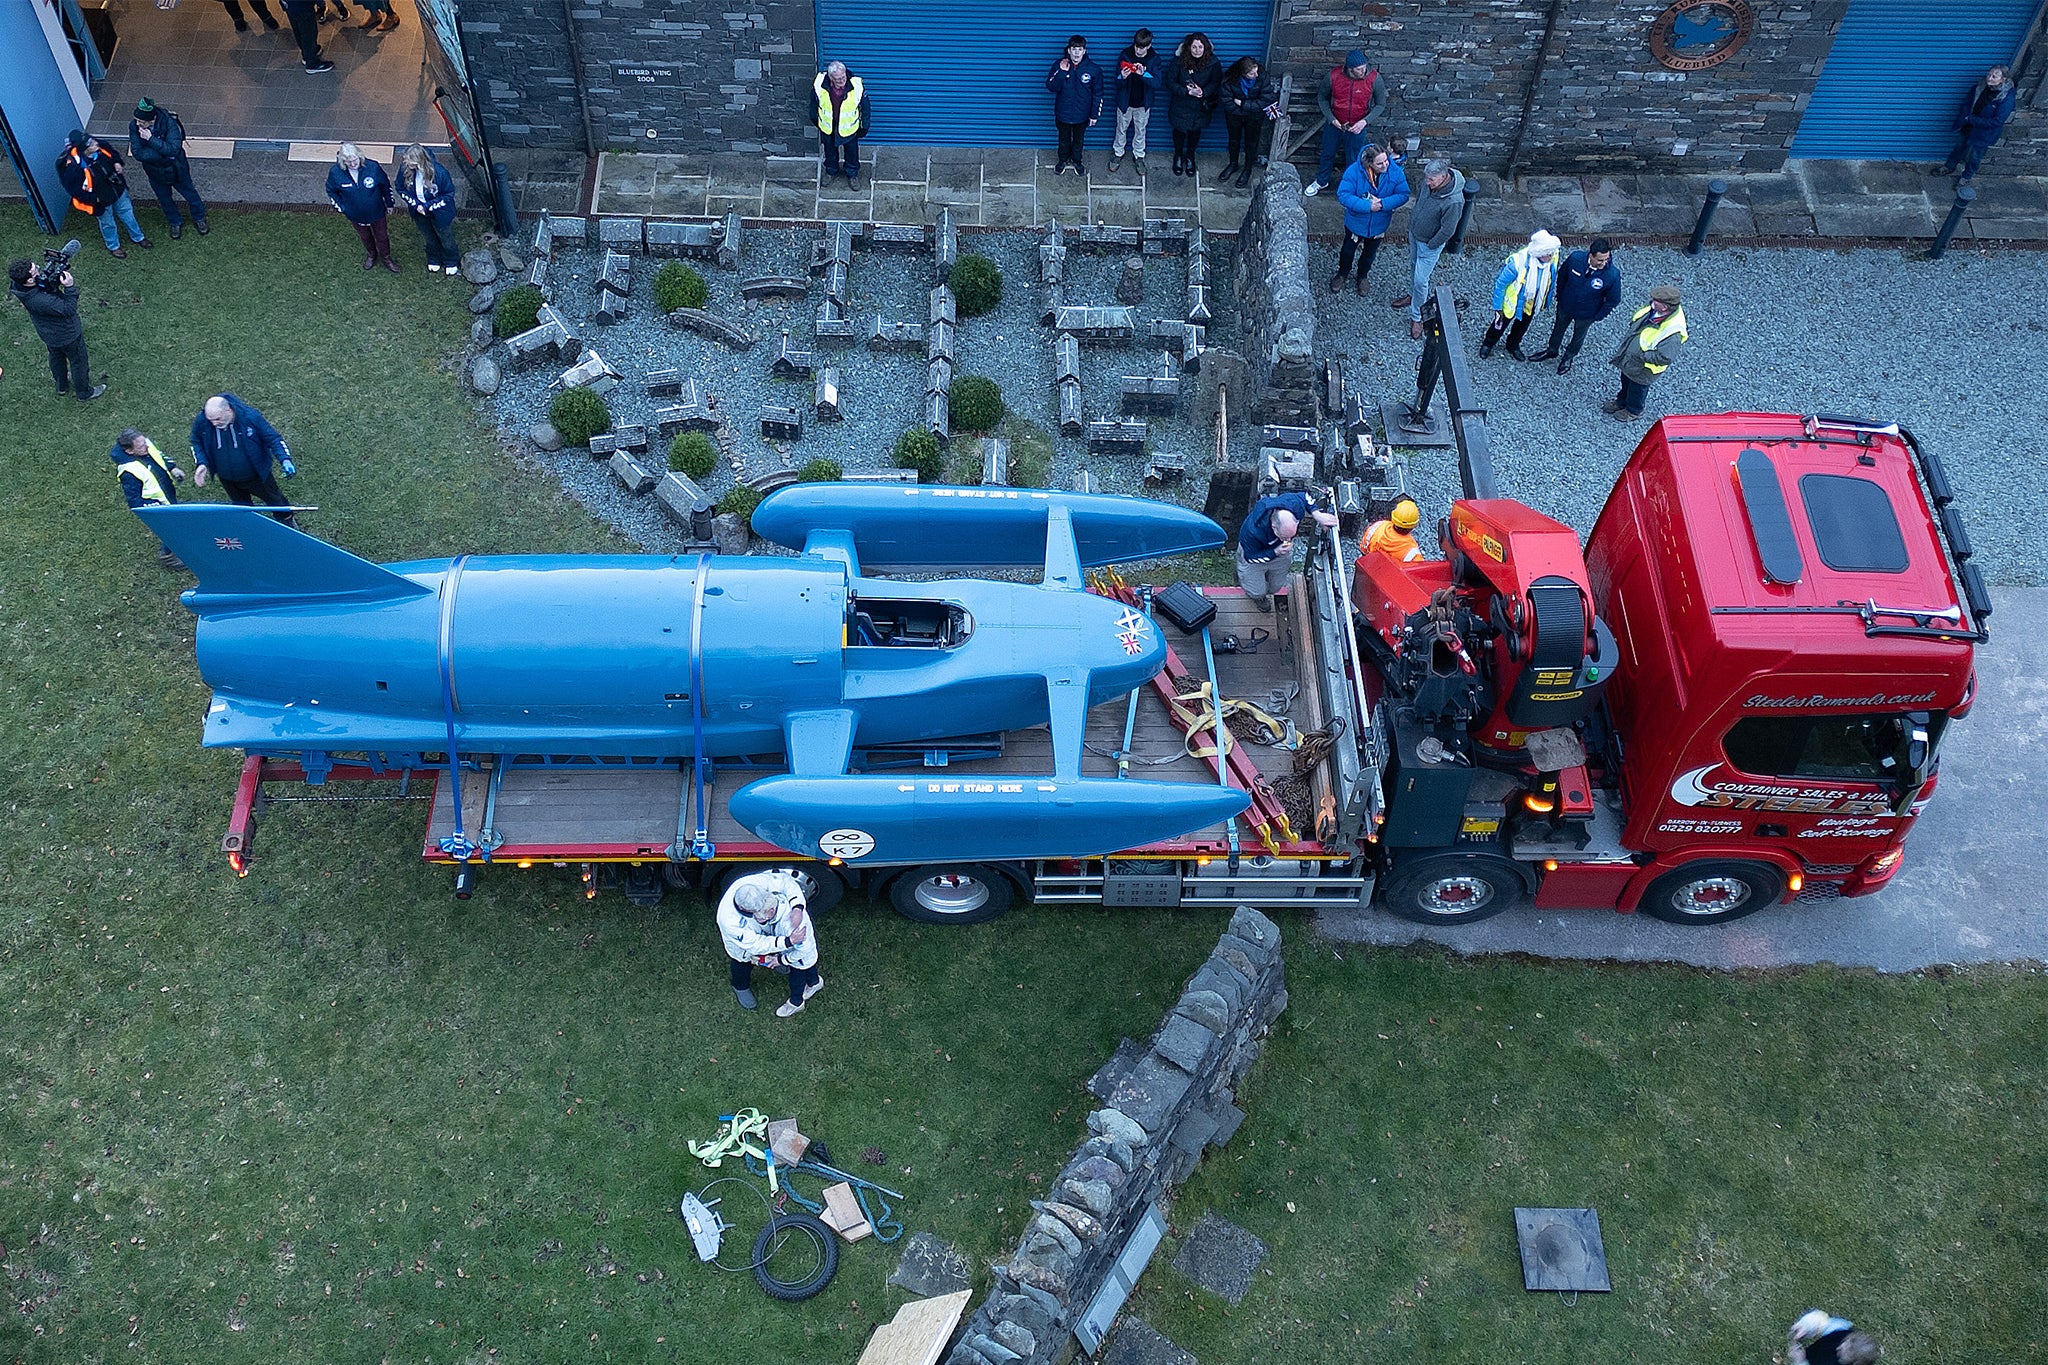 The Bluebird K7, which he set seven world water speed records between 1955 and 1967, arrives at the Ruskin Museum